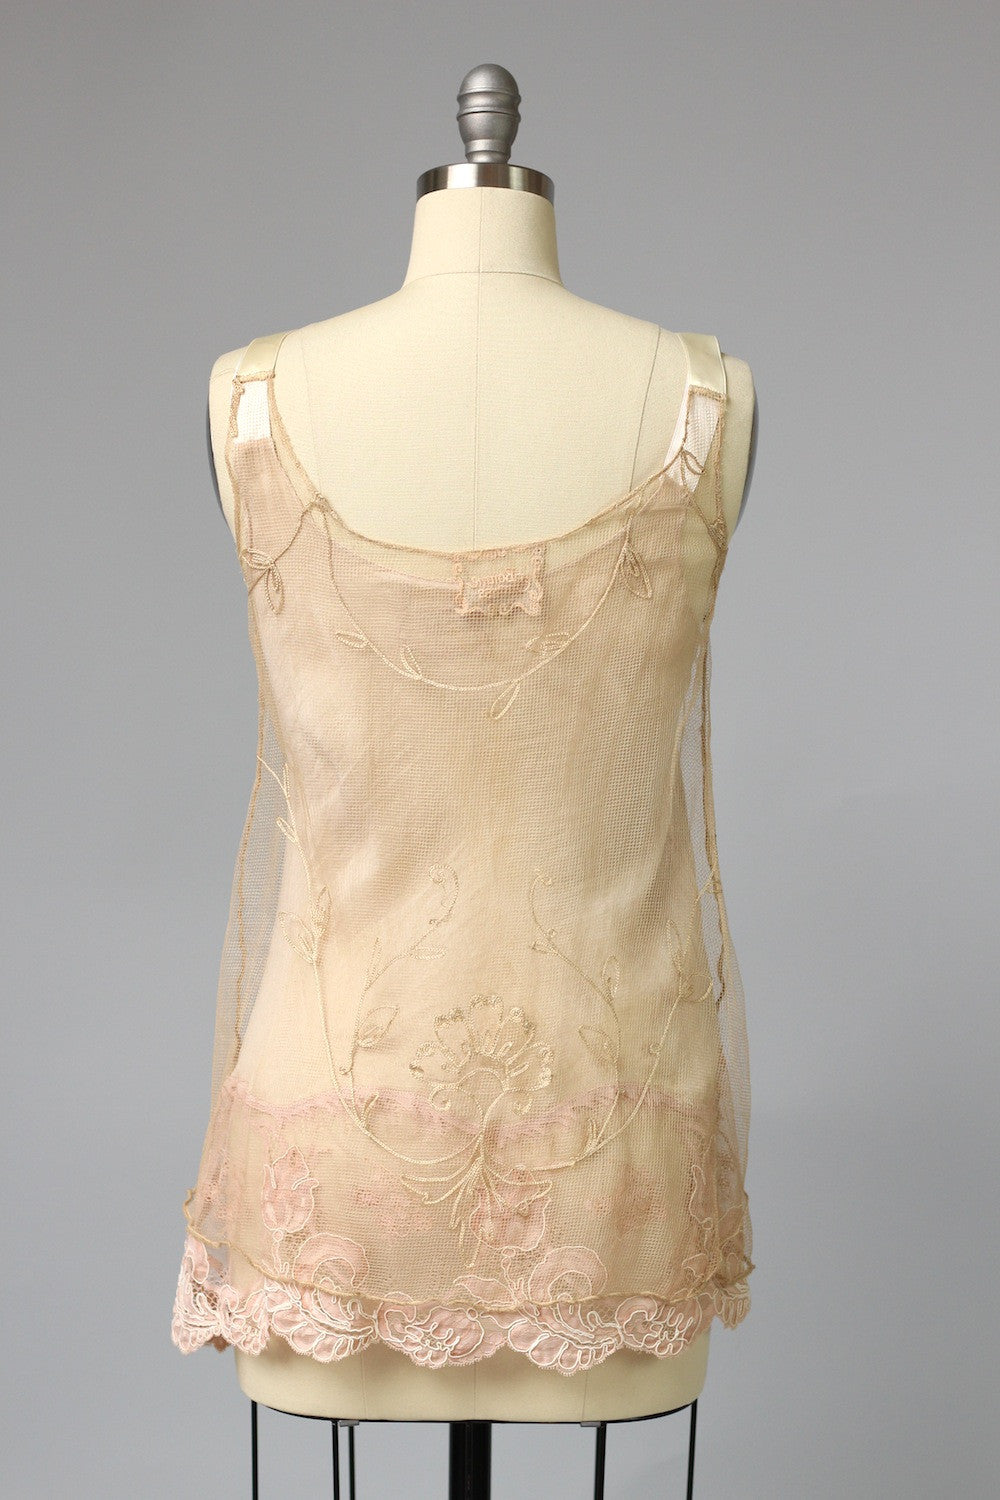 Antique French Tambour Lace Tank Top by Bonnie Strauss